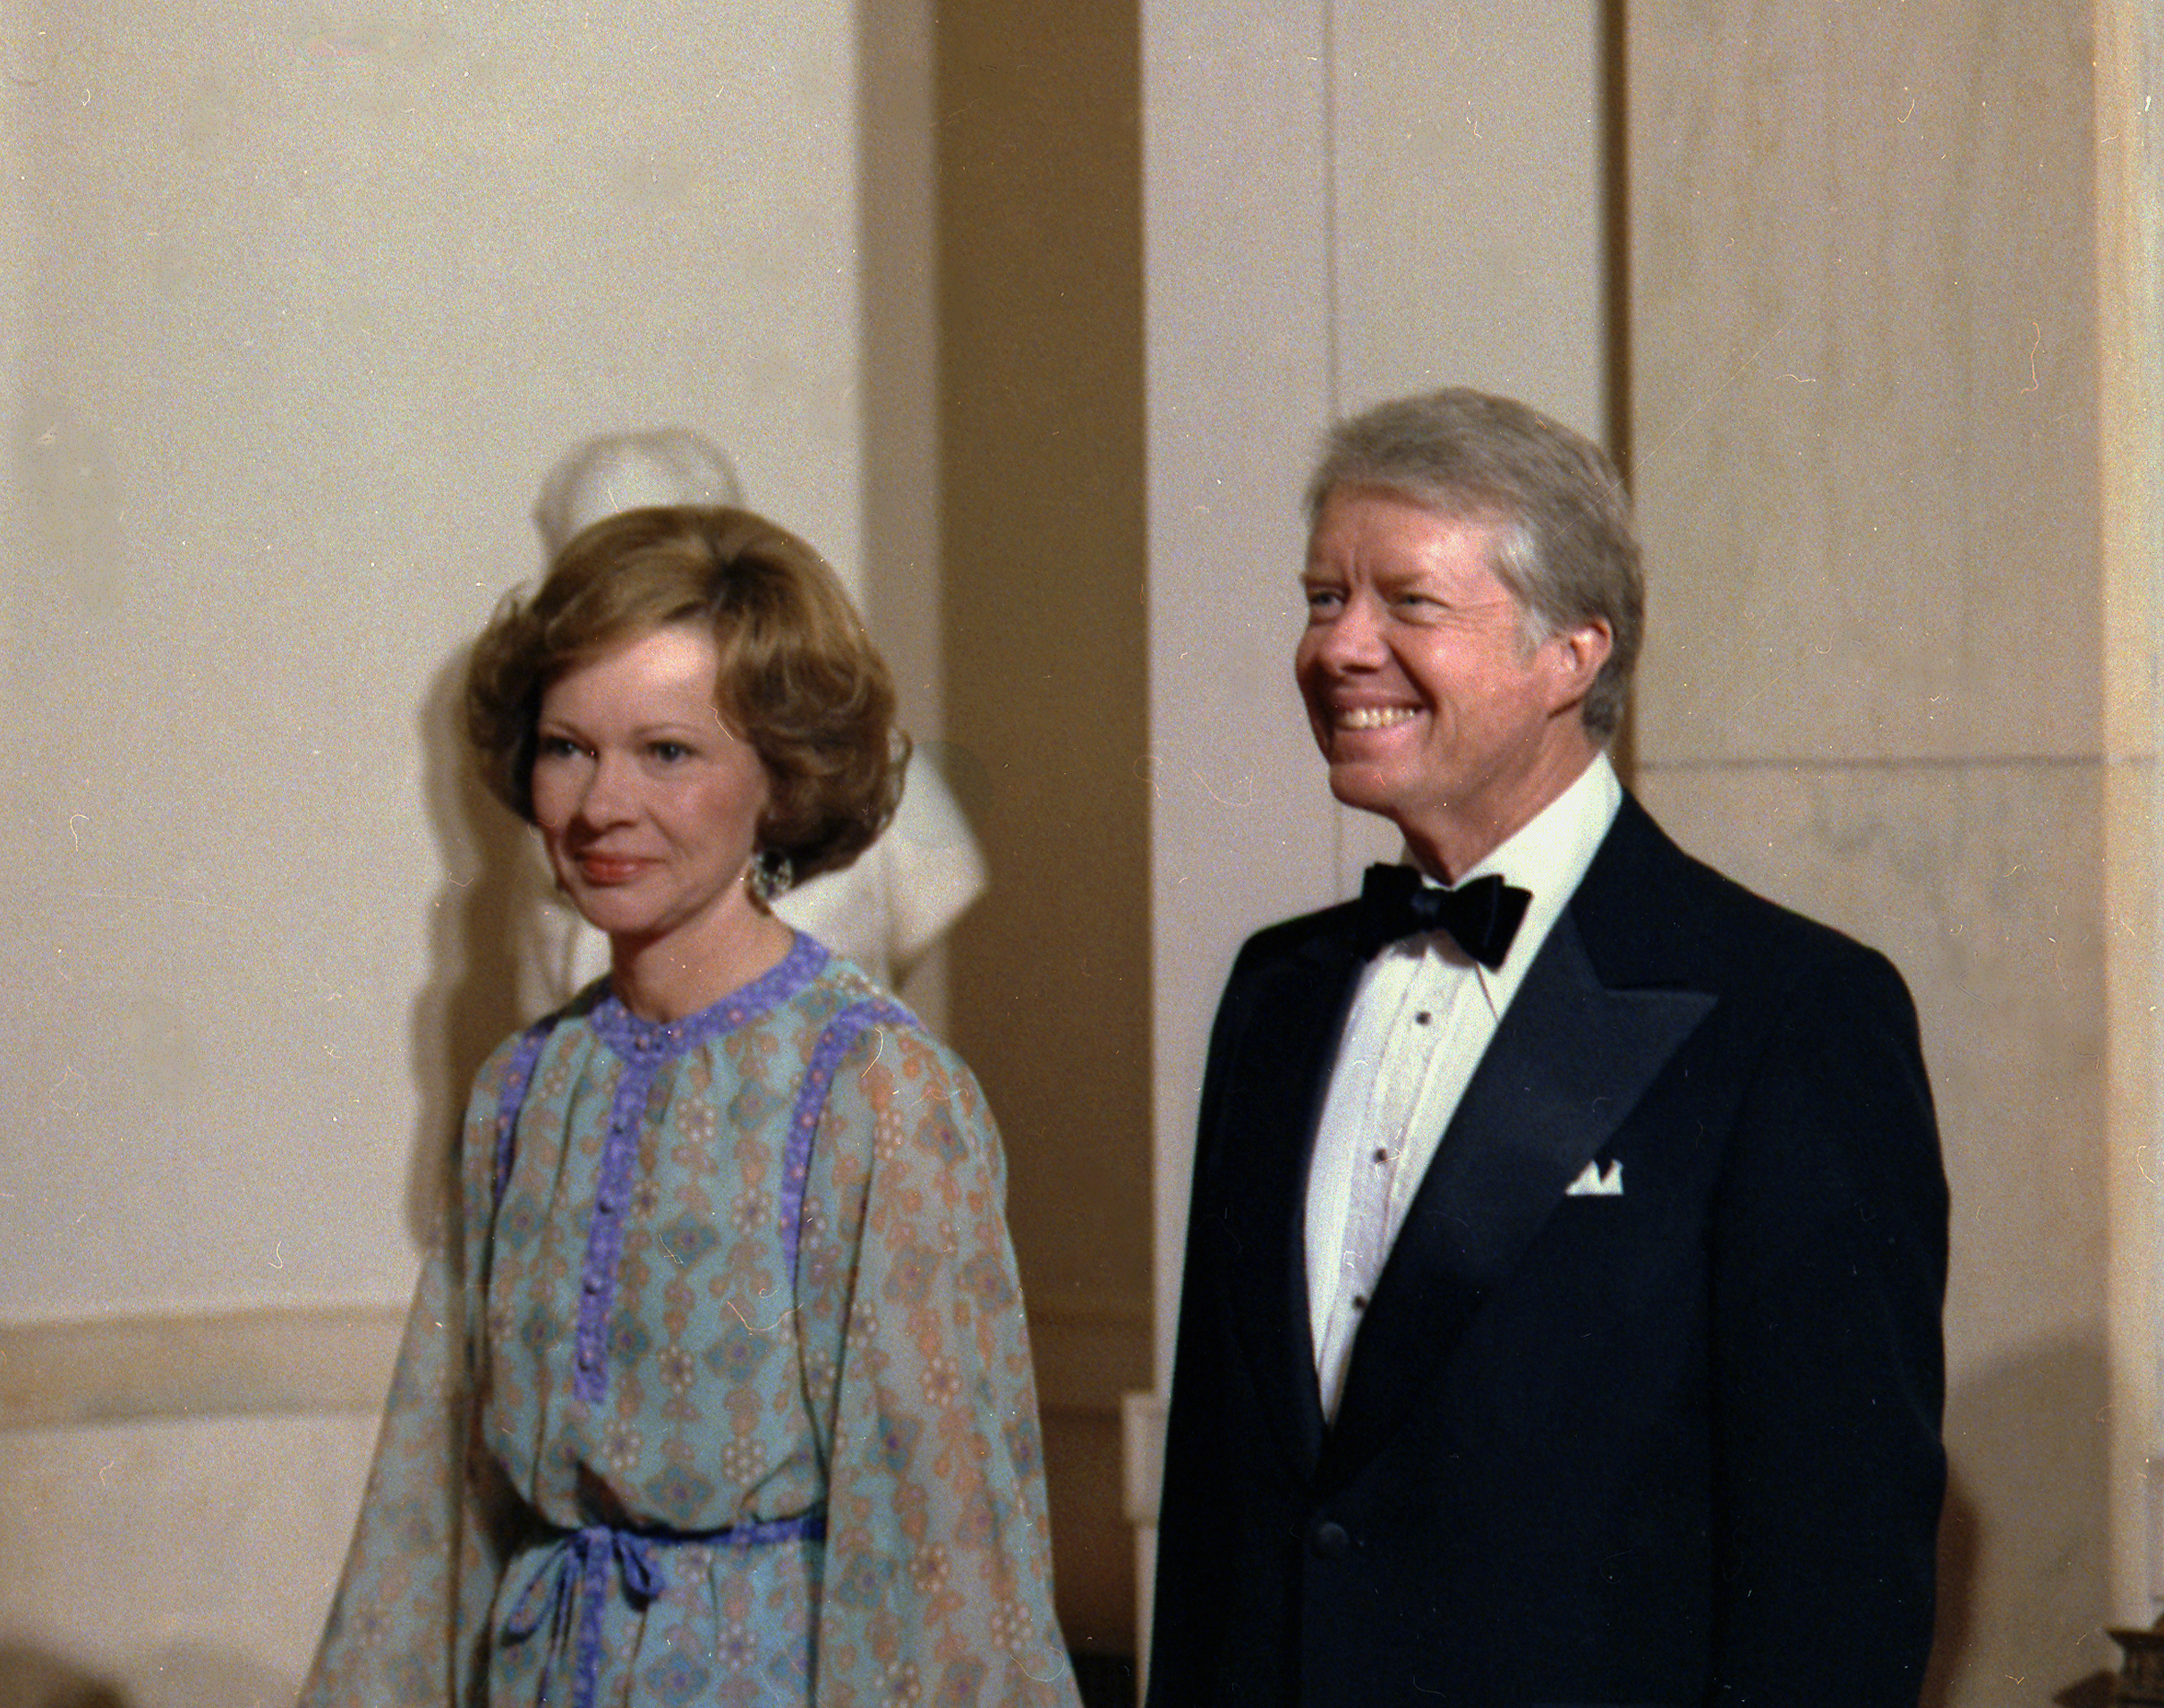 Former U.S. First Lady Rosalynn Carter and former U.S. President Jimmy Carter at a formal event on April 17, 1978 | Source: Getty Images